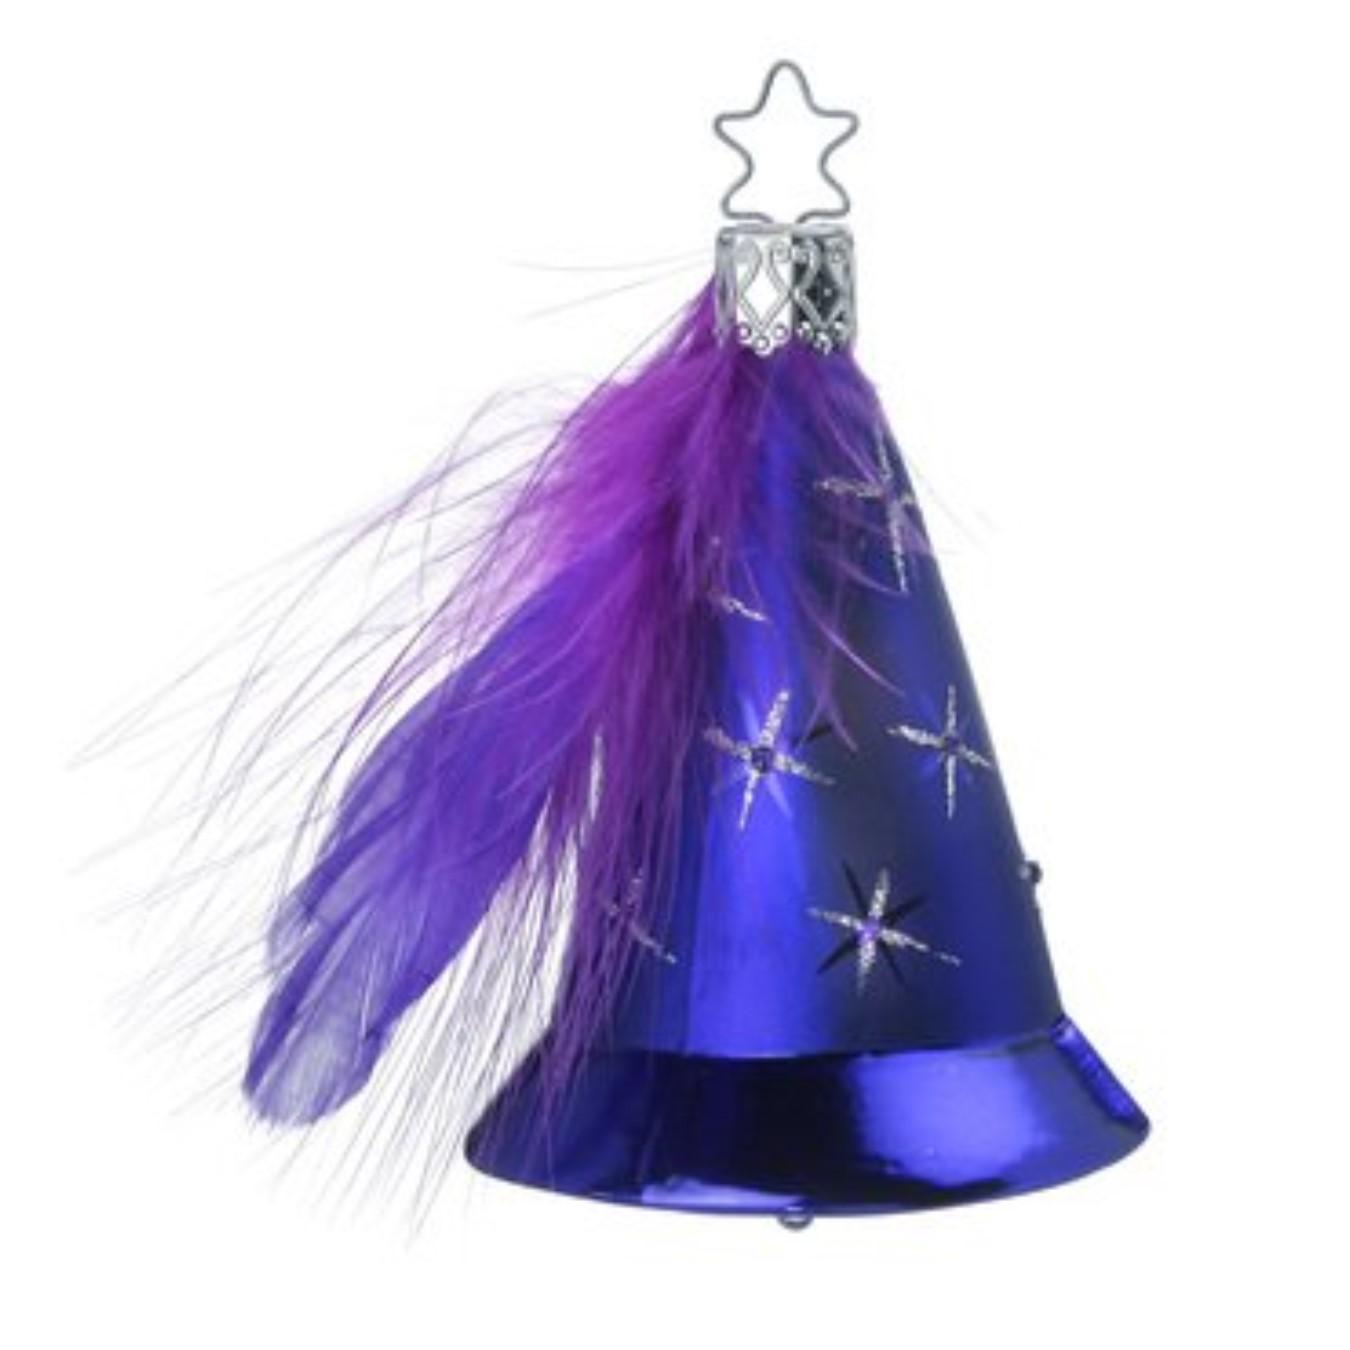 Wizard Hat Bell Ornament by Inge Glas of Germany